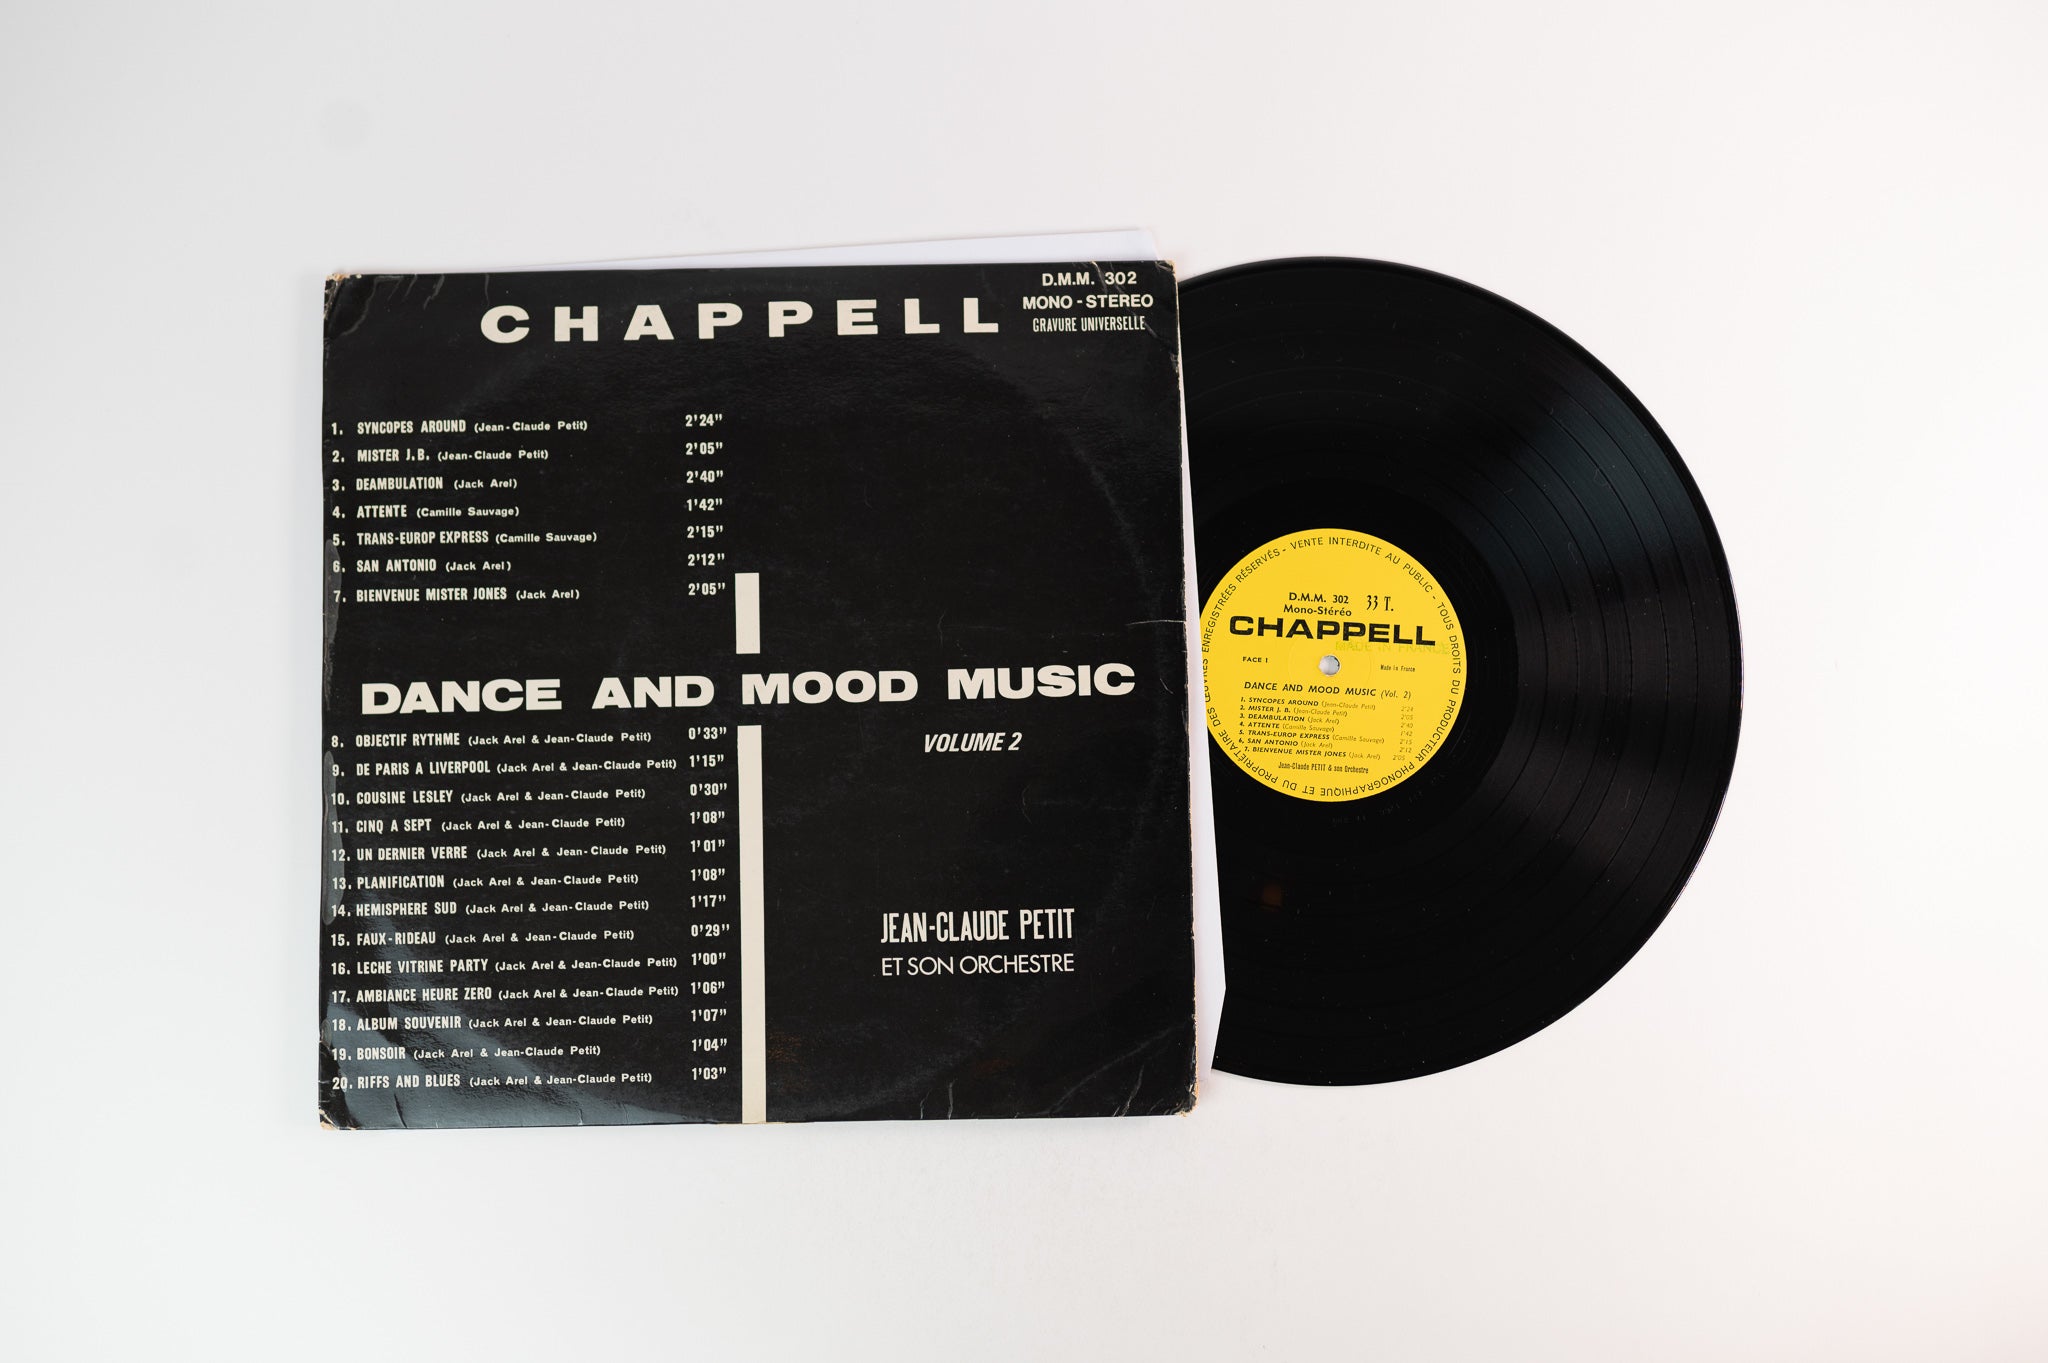 Jean-Claude Petit Et Son Orchestre - Dance And Mood Music Volume 2 on Chappell Library LP